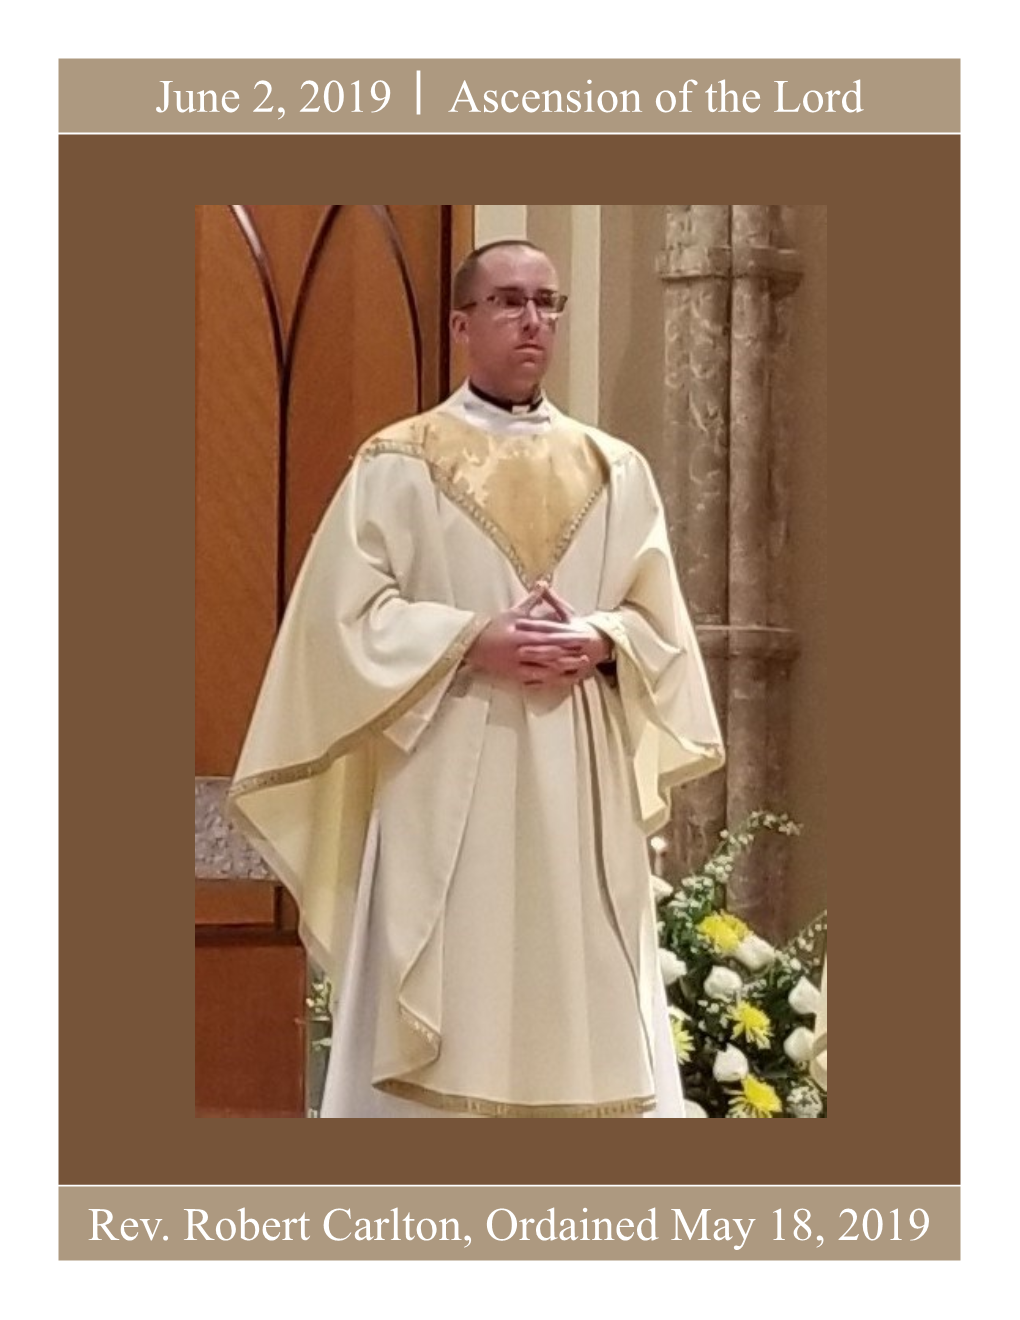 June 2, 2019 Ascension of the Lord Rev. Robert Carlton, Ordained May